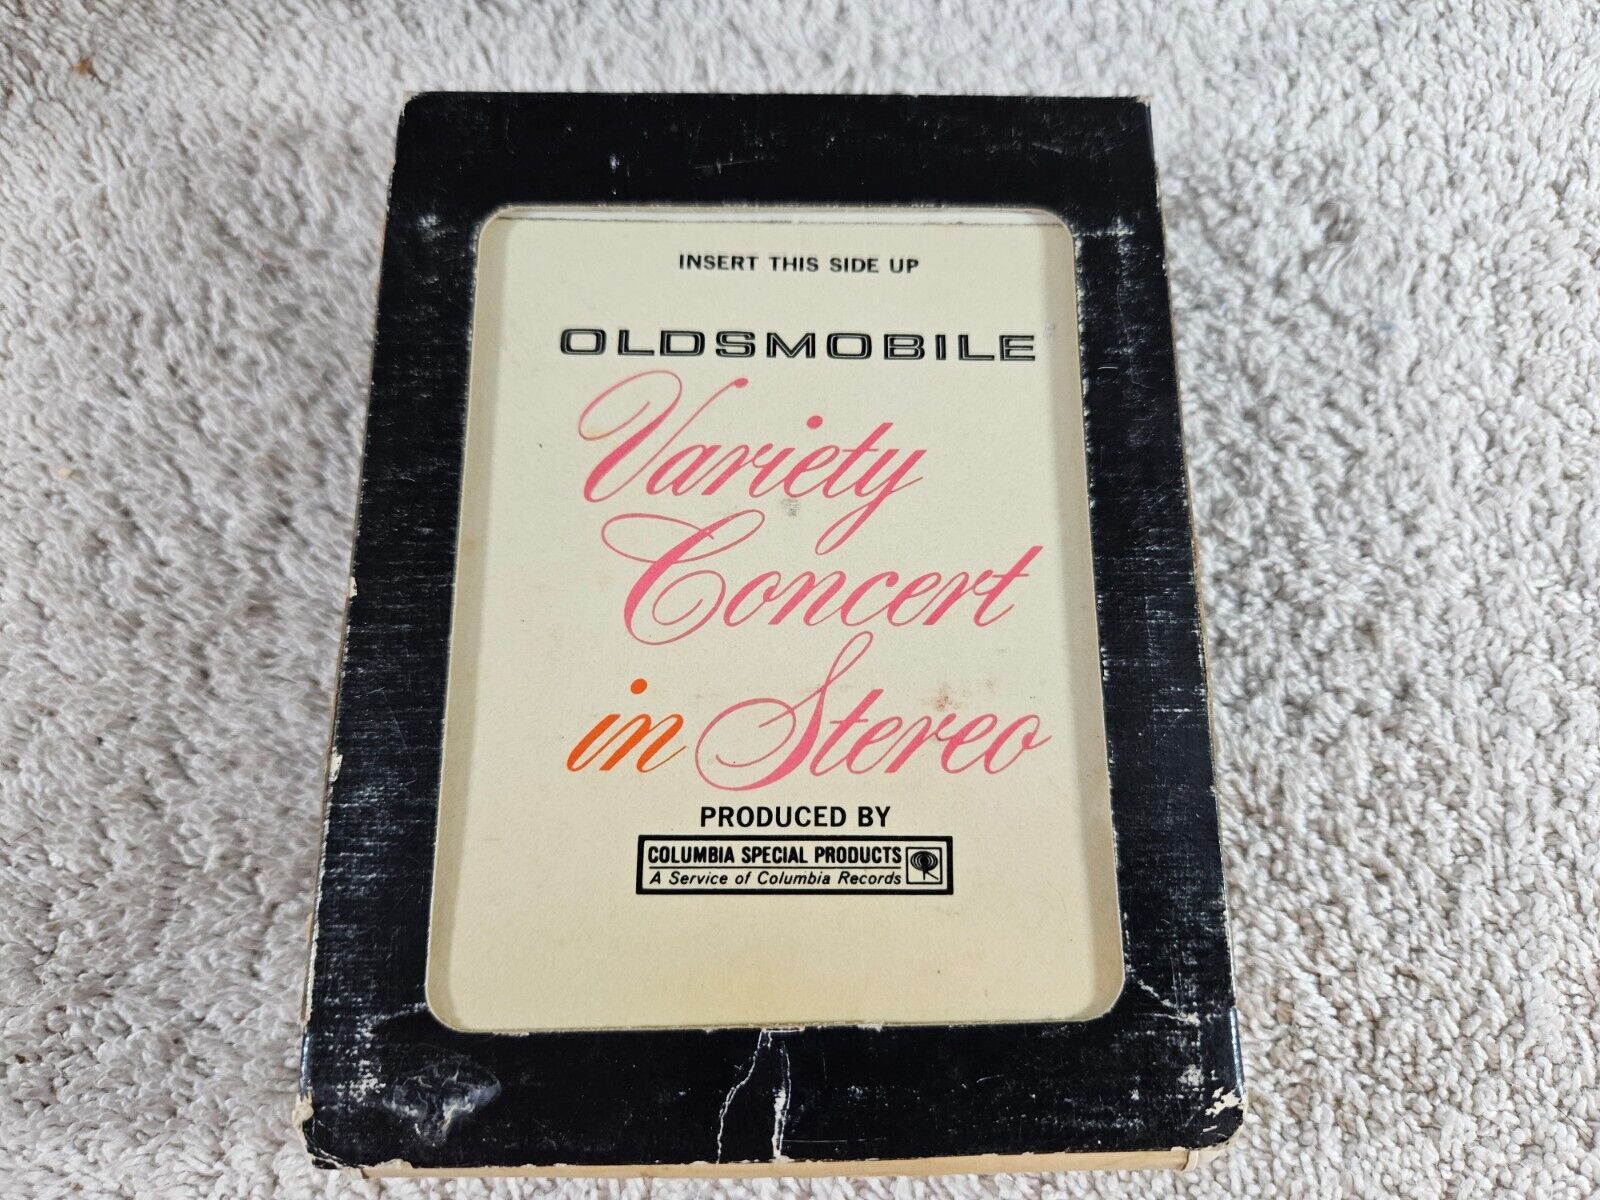 1967 Oldsmobile Variety Concert In Stereo 8-Track Tape. Pro serviced